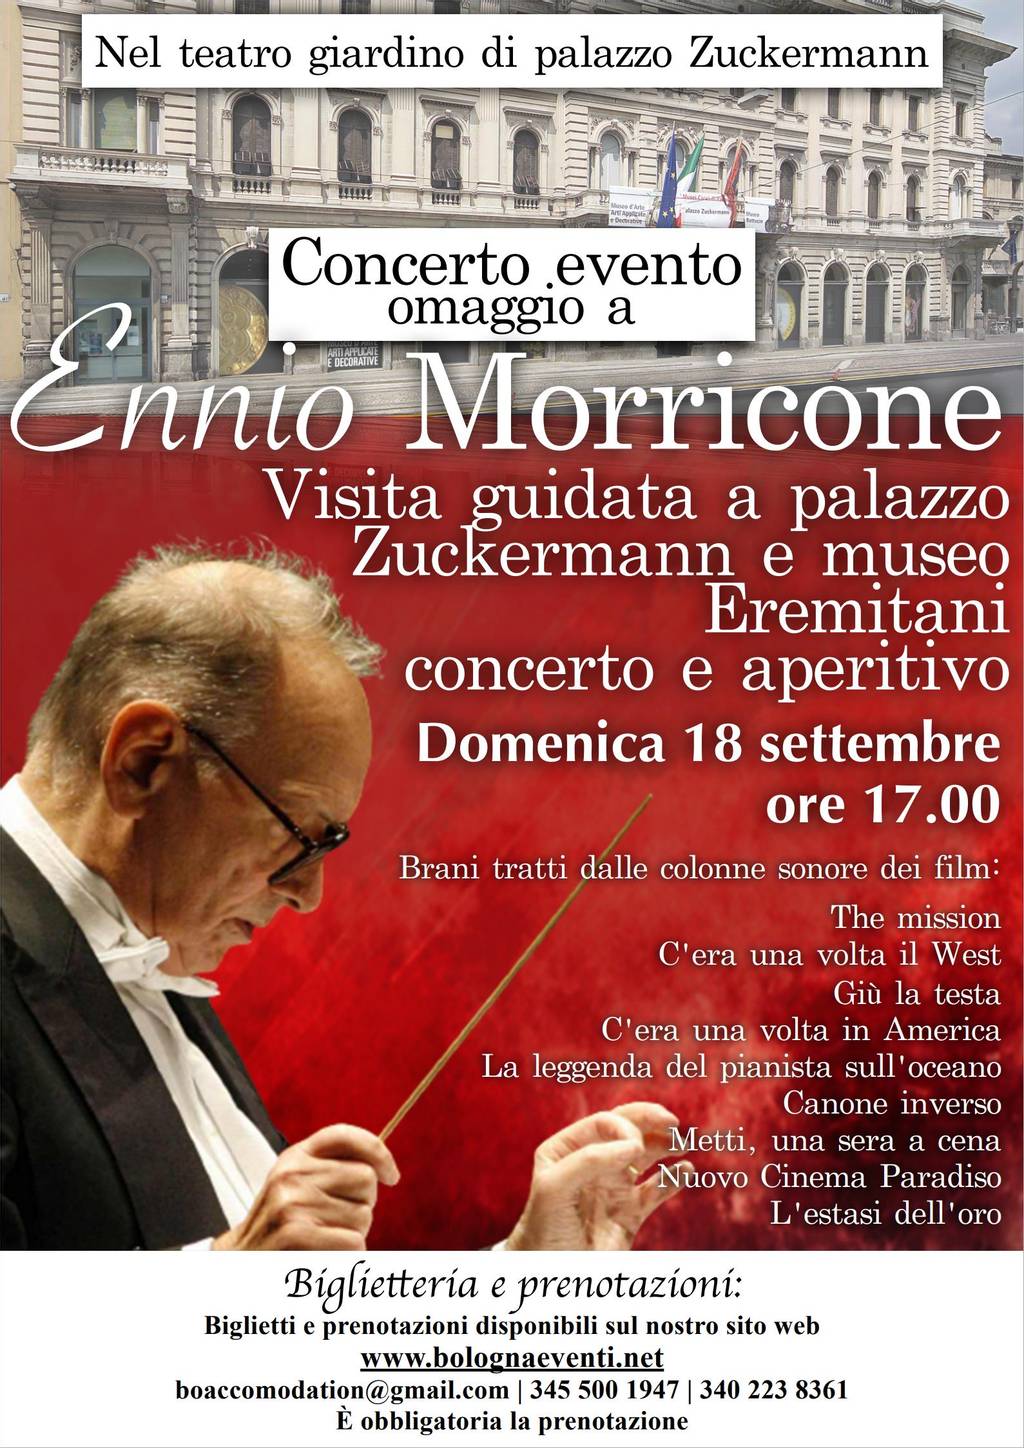 Aperitif concert with guided tour - Tribute to Ennio Morricone